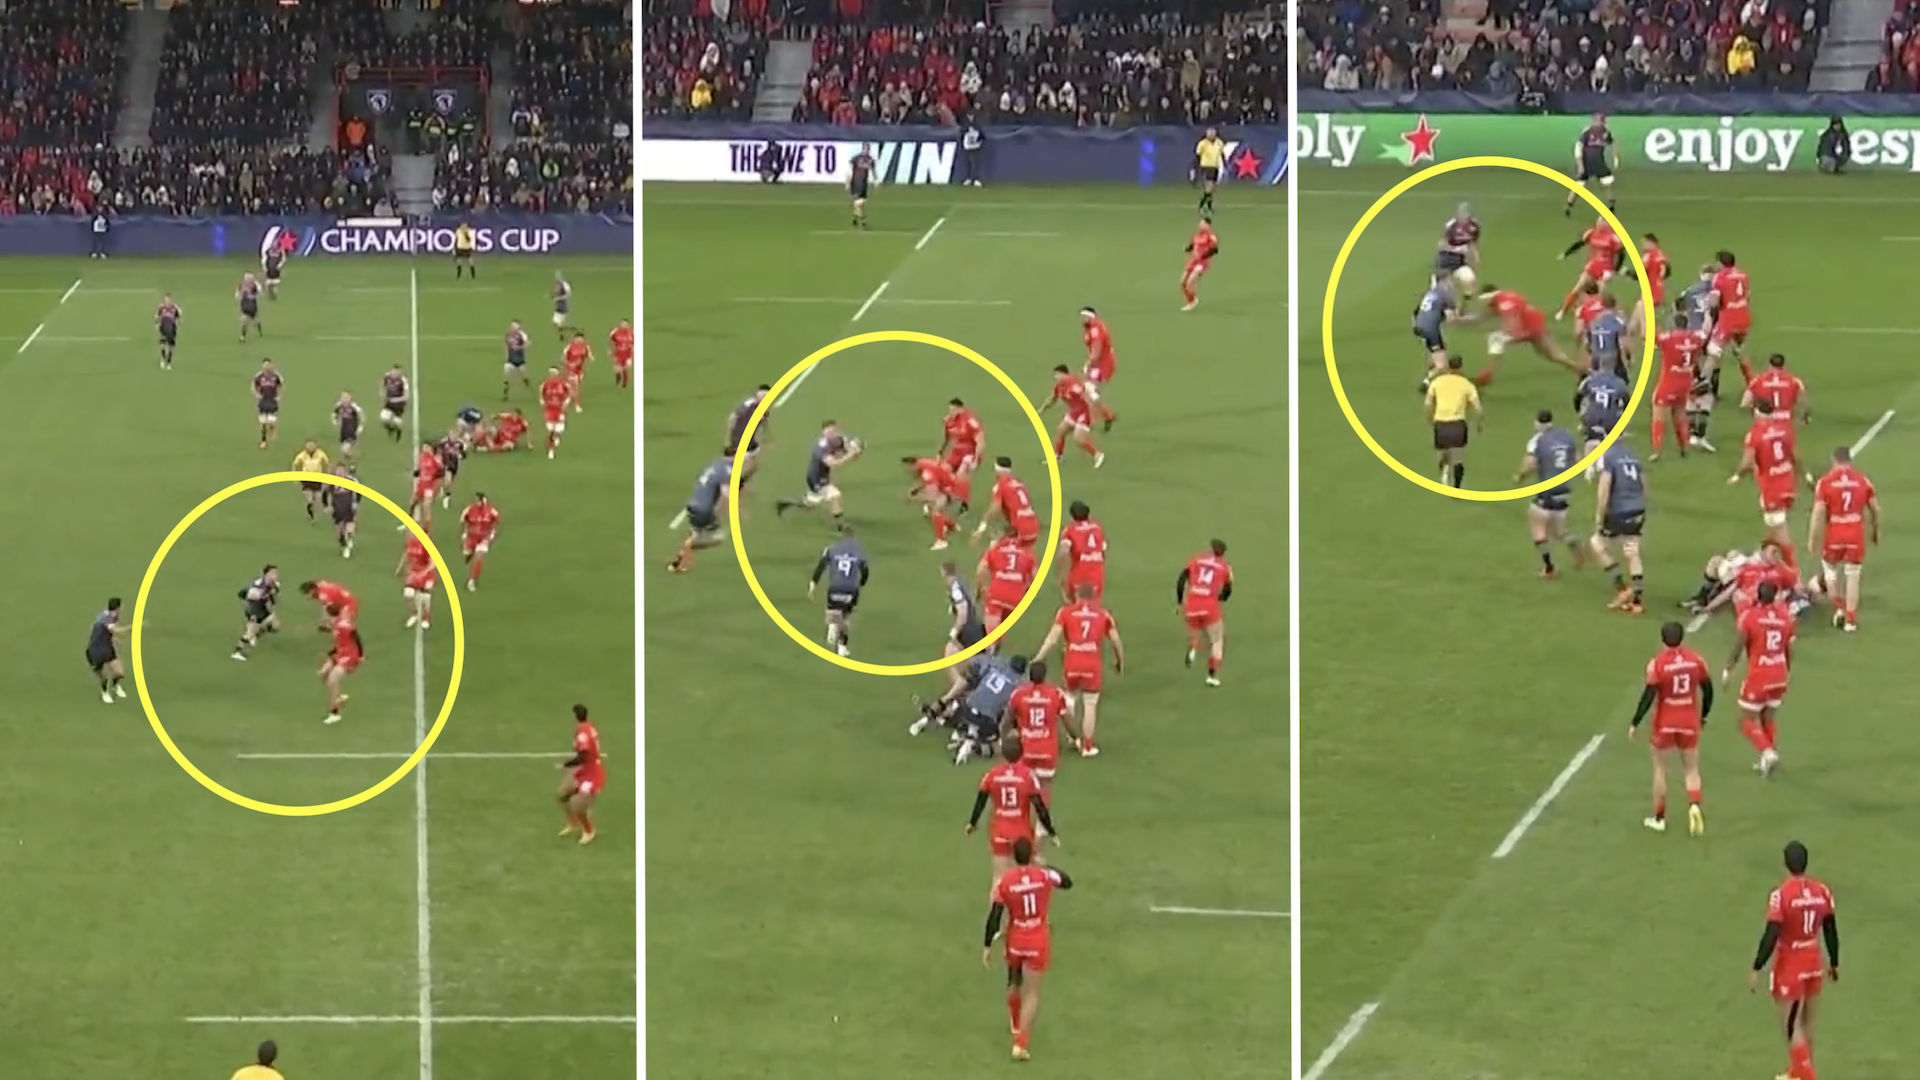 Turbo-charged Toulouse march Munster back with three brutal hits in seconds